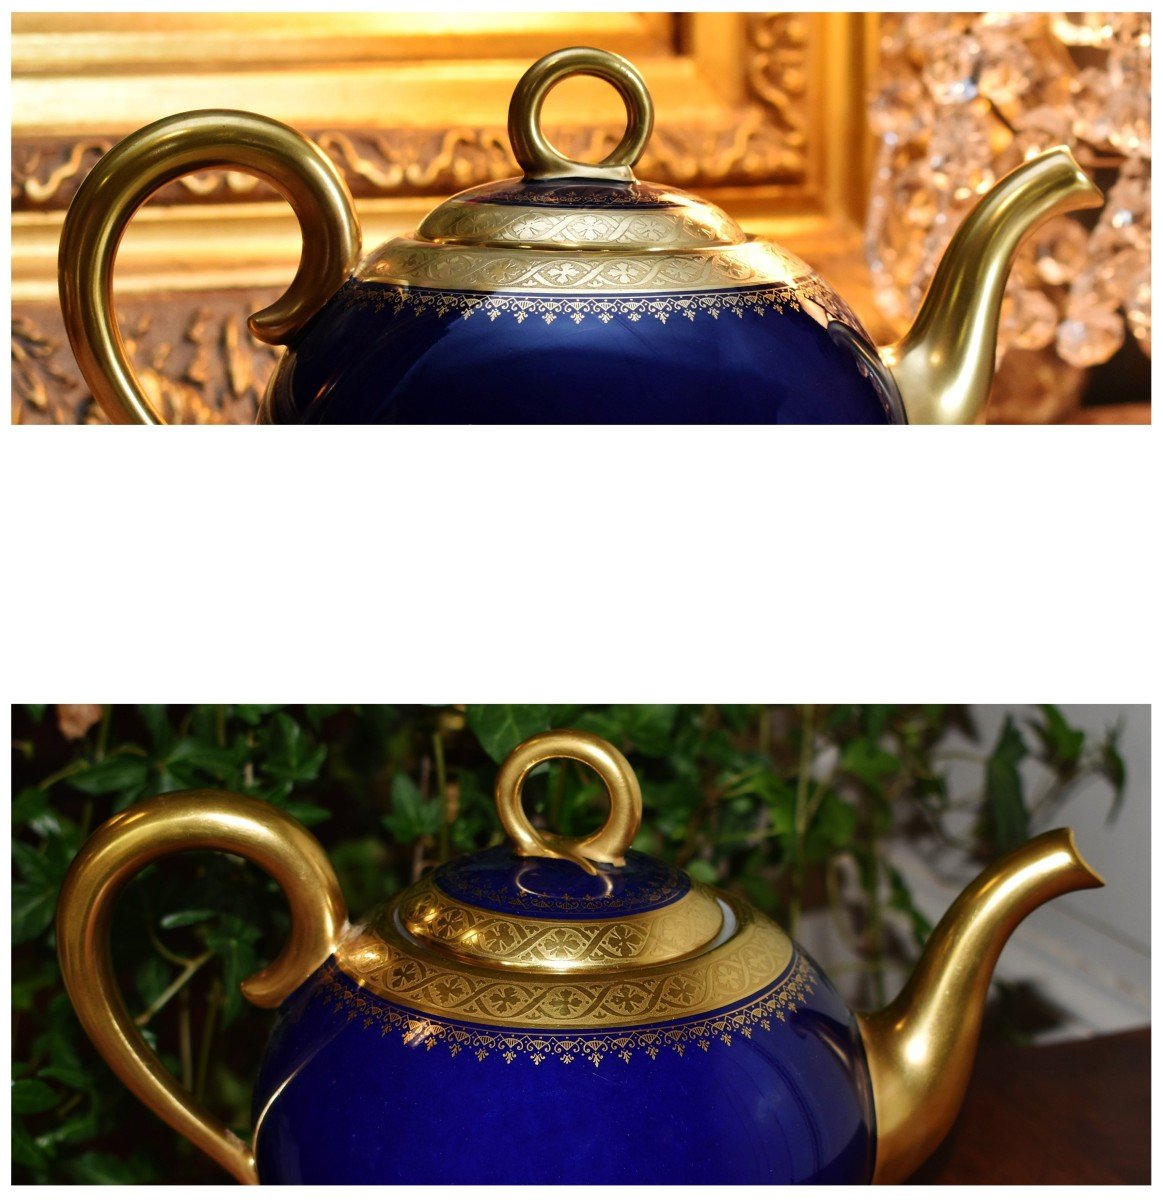 Jug, Coffee Pot Or Teapot In Limoges Porcelain In Kiln Blue And Gold Inlay.-photo-5